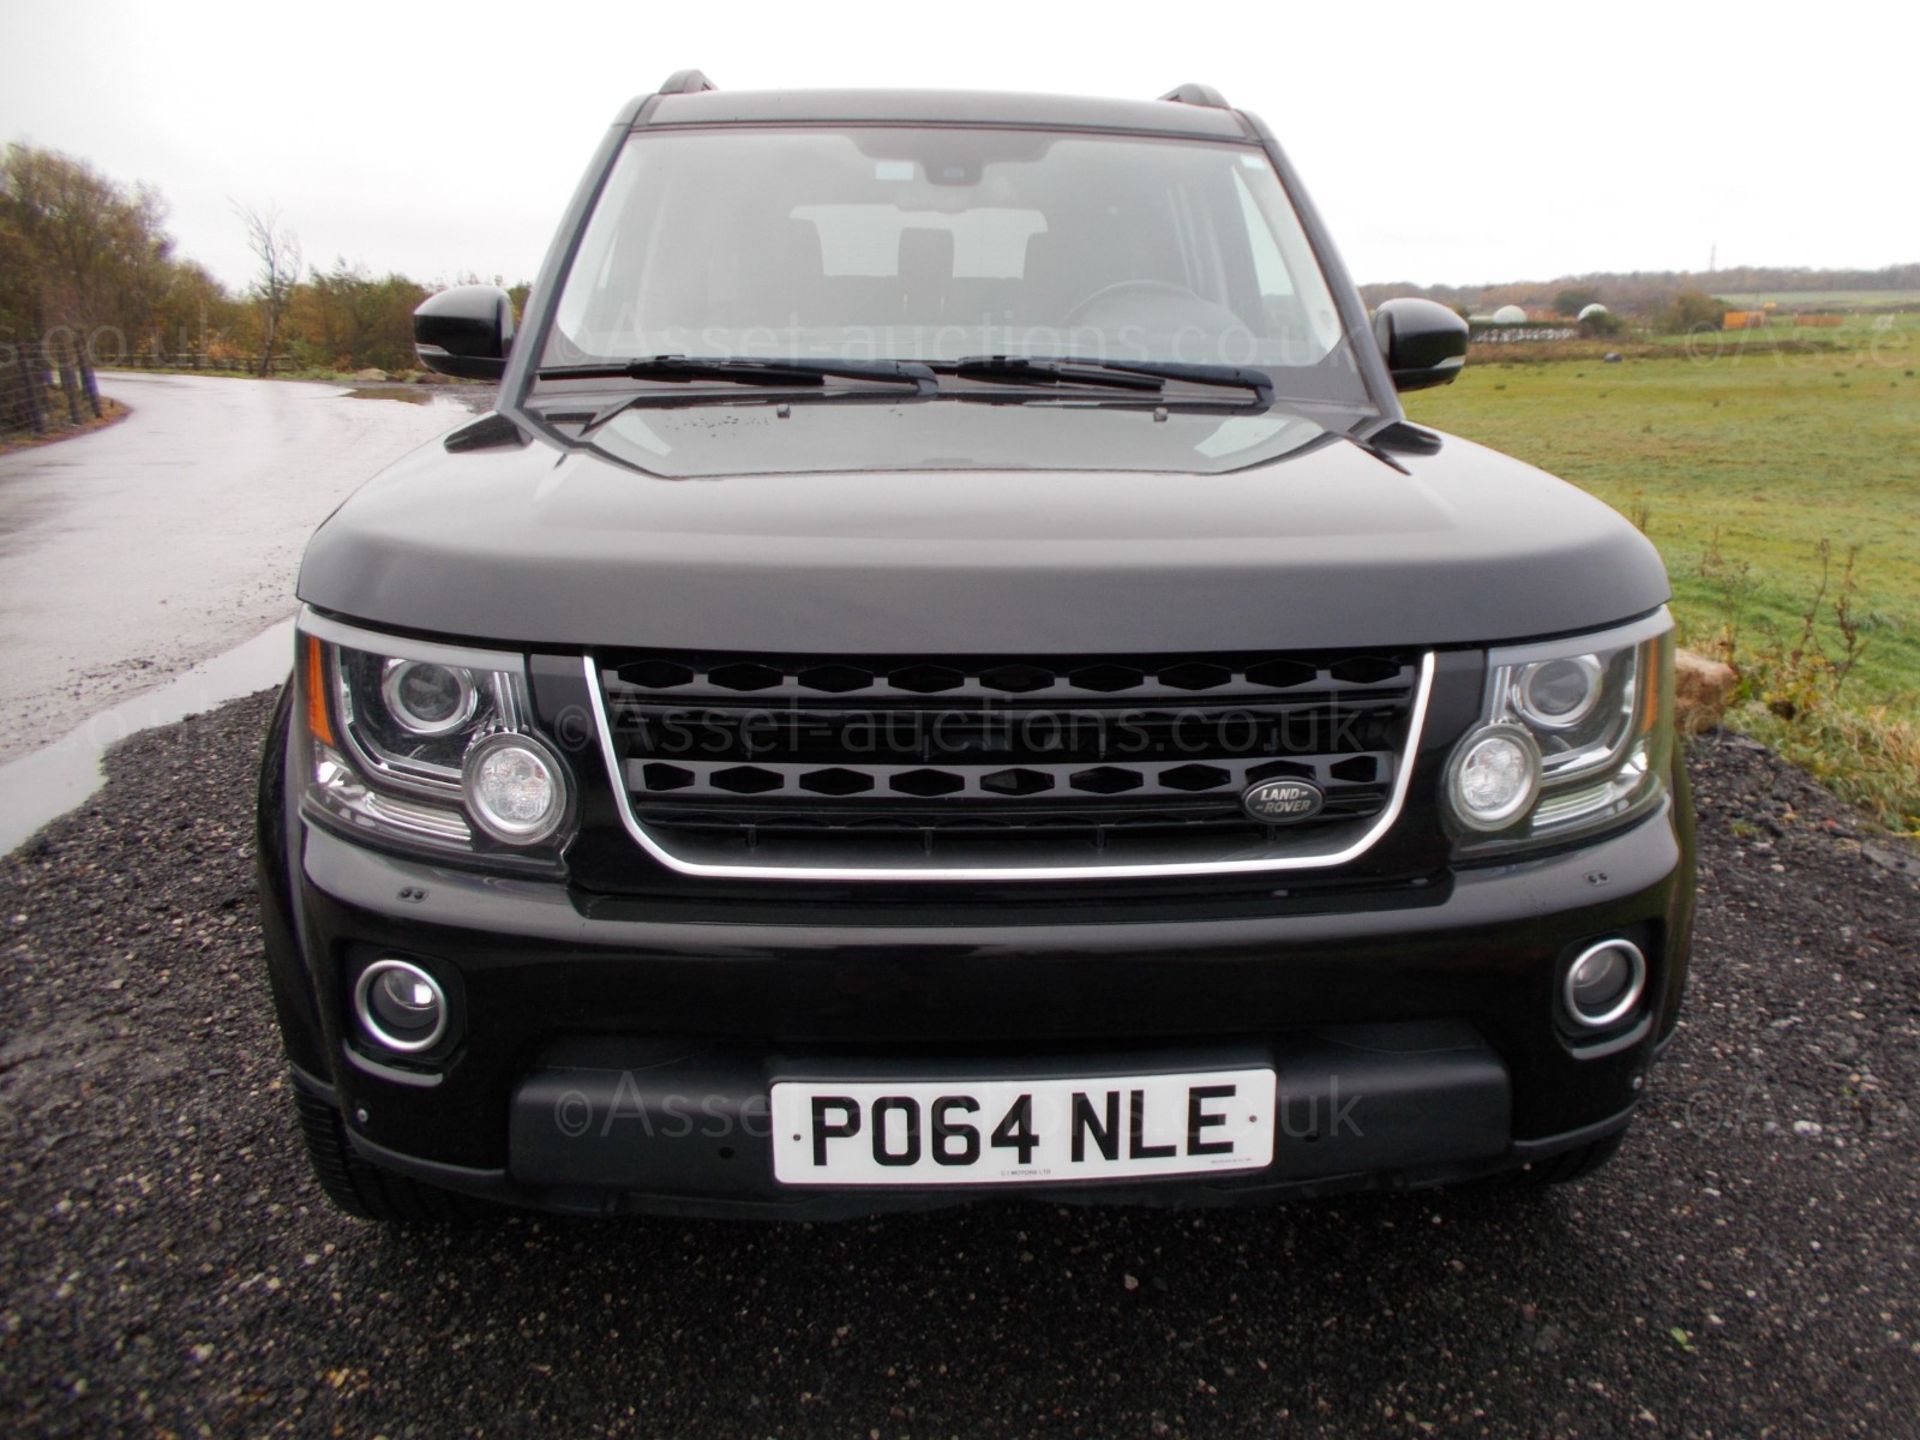 2015/64 LAND ROVER DISCOVERY HSE LUXURY SCV6 7 SEATER, 3.0 V6 PETROL SUPERCHARGED *PLUS VAT* - Image 2 of 28